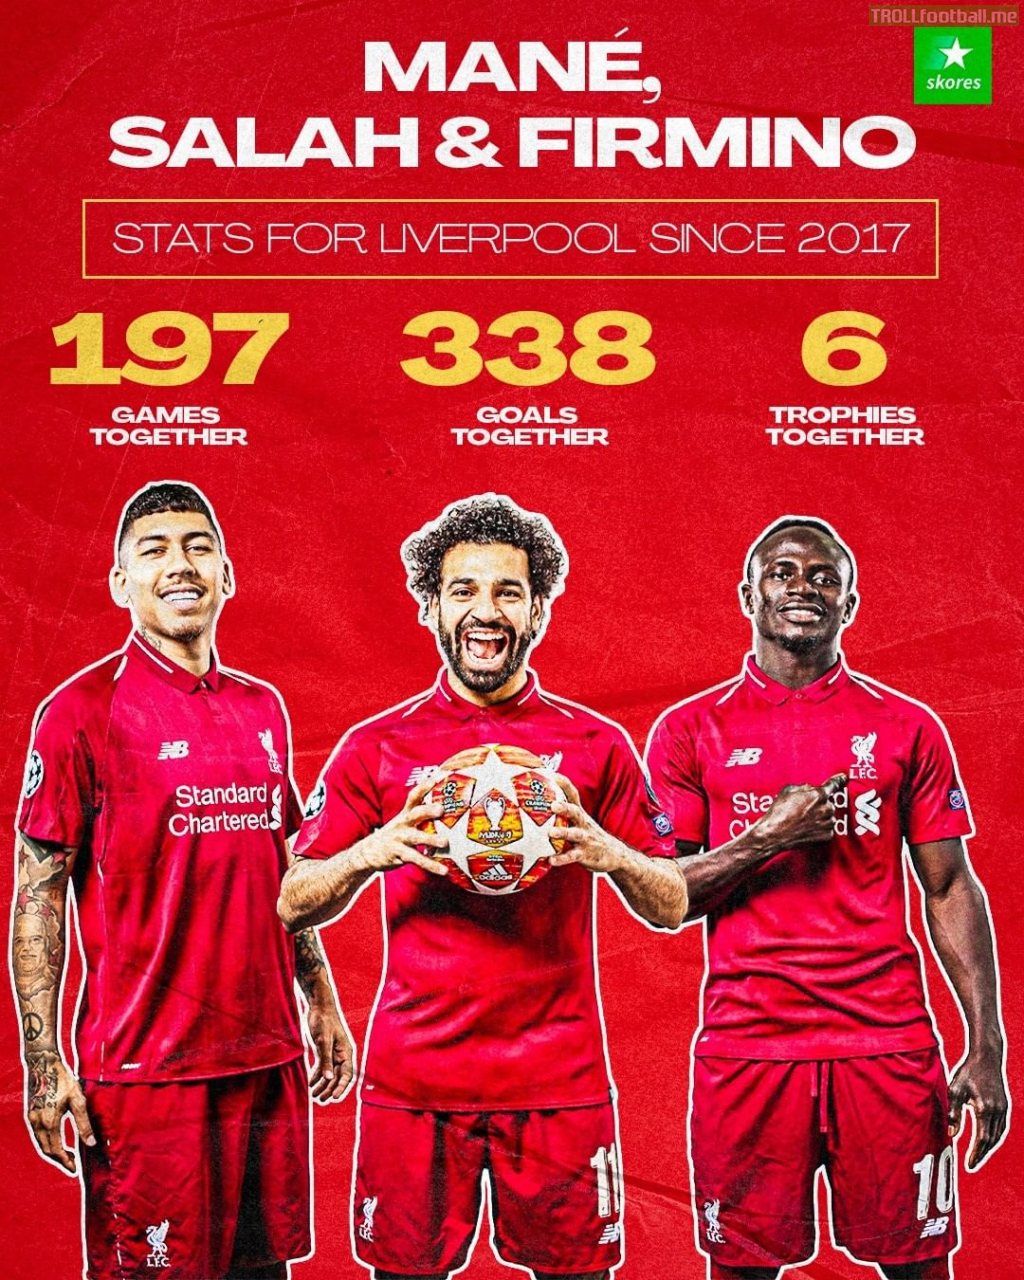 [Skores] Mane, Salah & Firmino Stats For Liverpool Since 2017